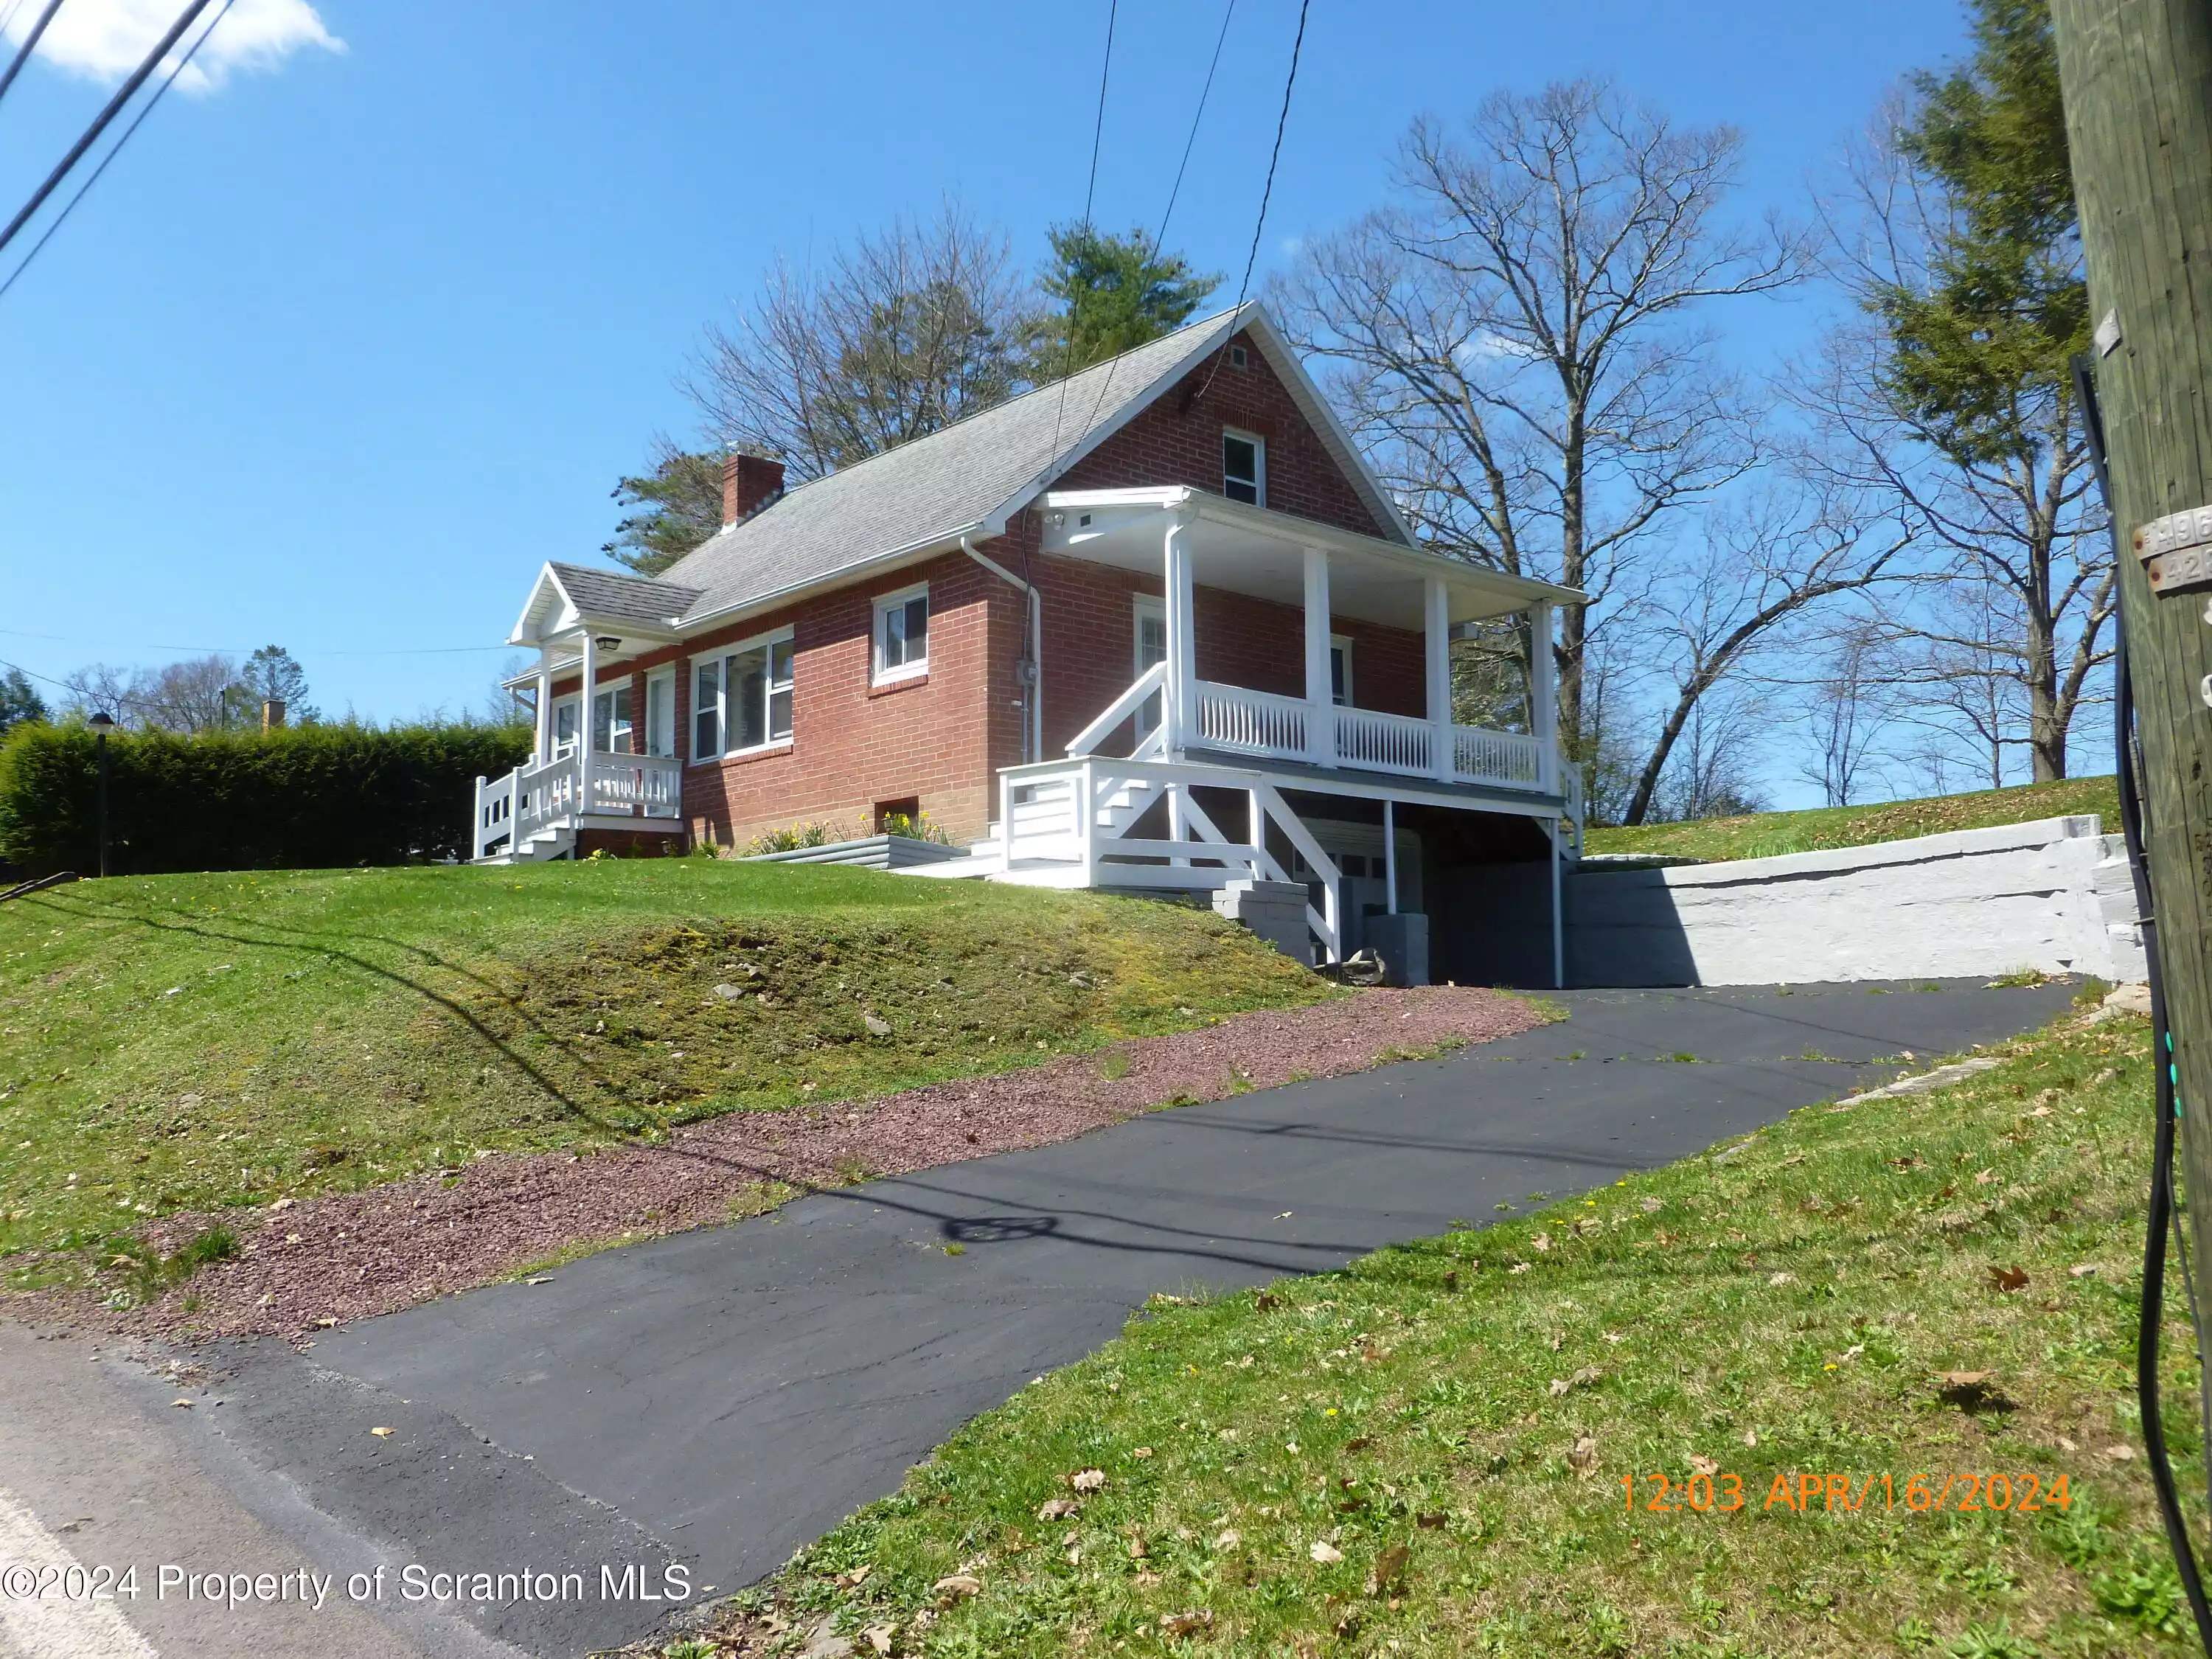 178 Overbrook Road, Shavertown, Pennsylvania 18708, 5 Rooms Rooms,1 BathroomBathrooms,Residential,For Sale,Overbrook,GSBSC2043